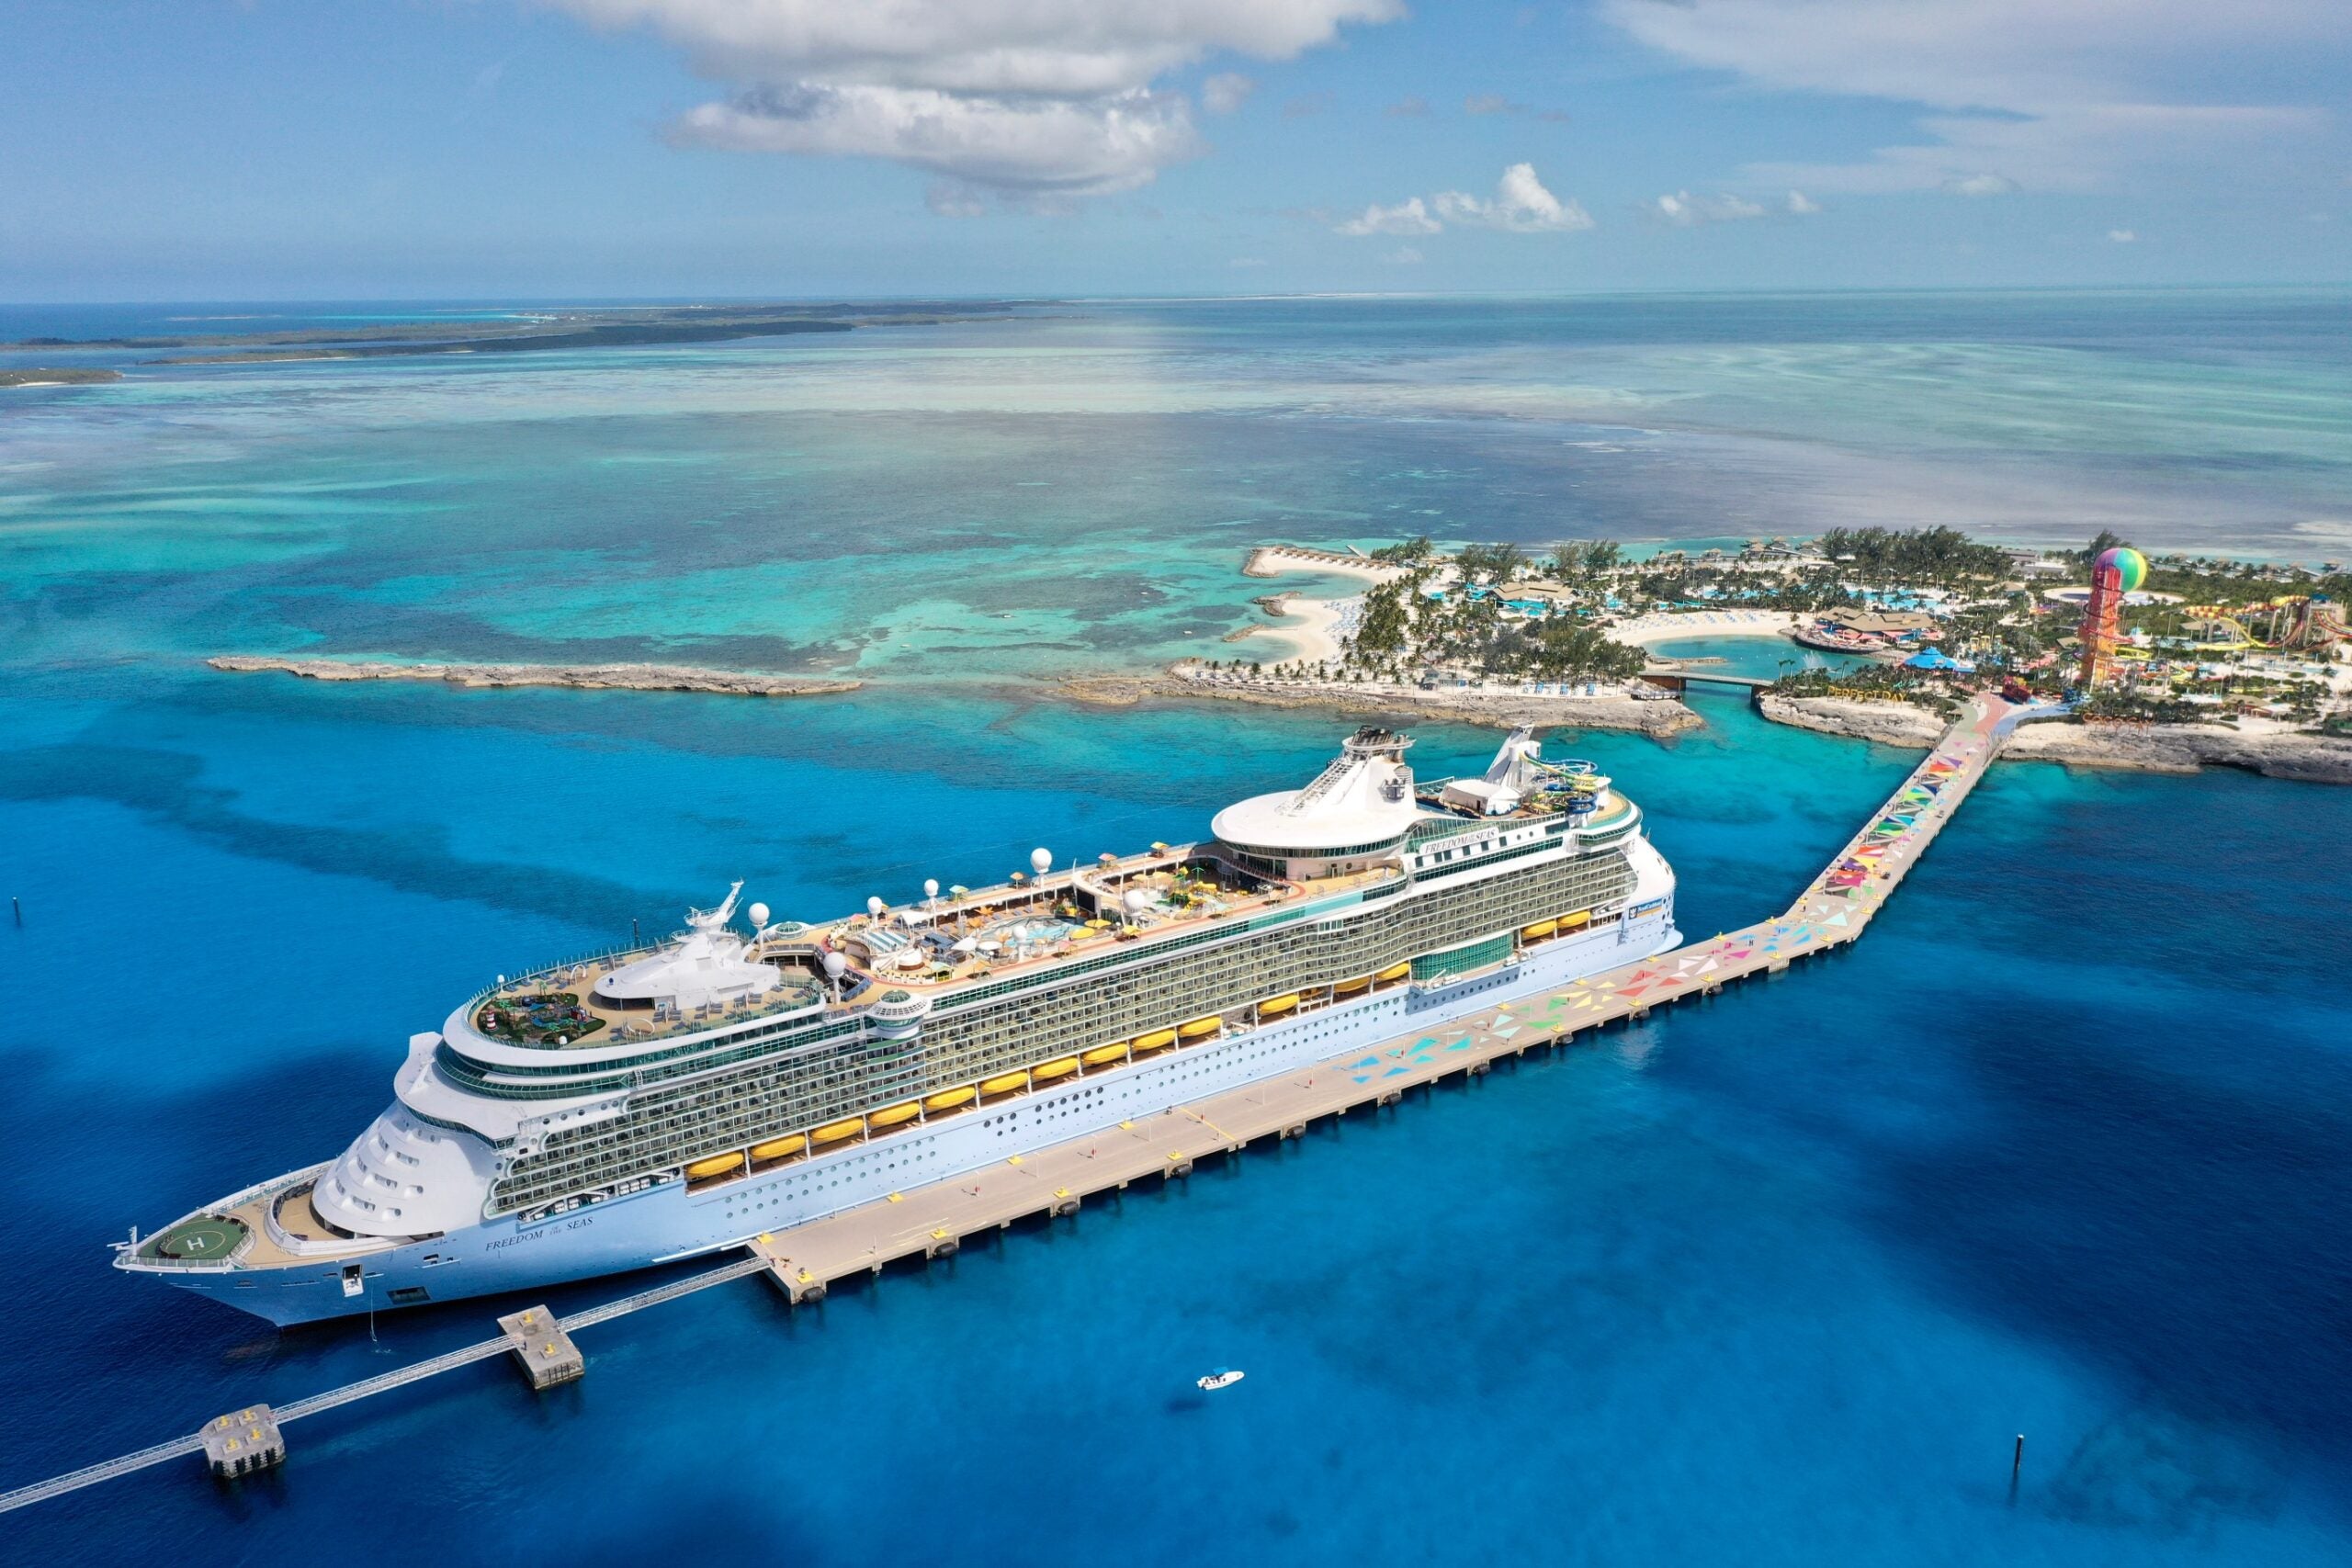 is a cruise to bahamas worth it